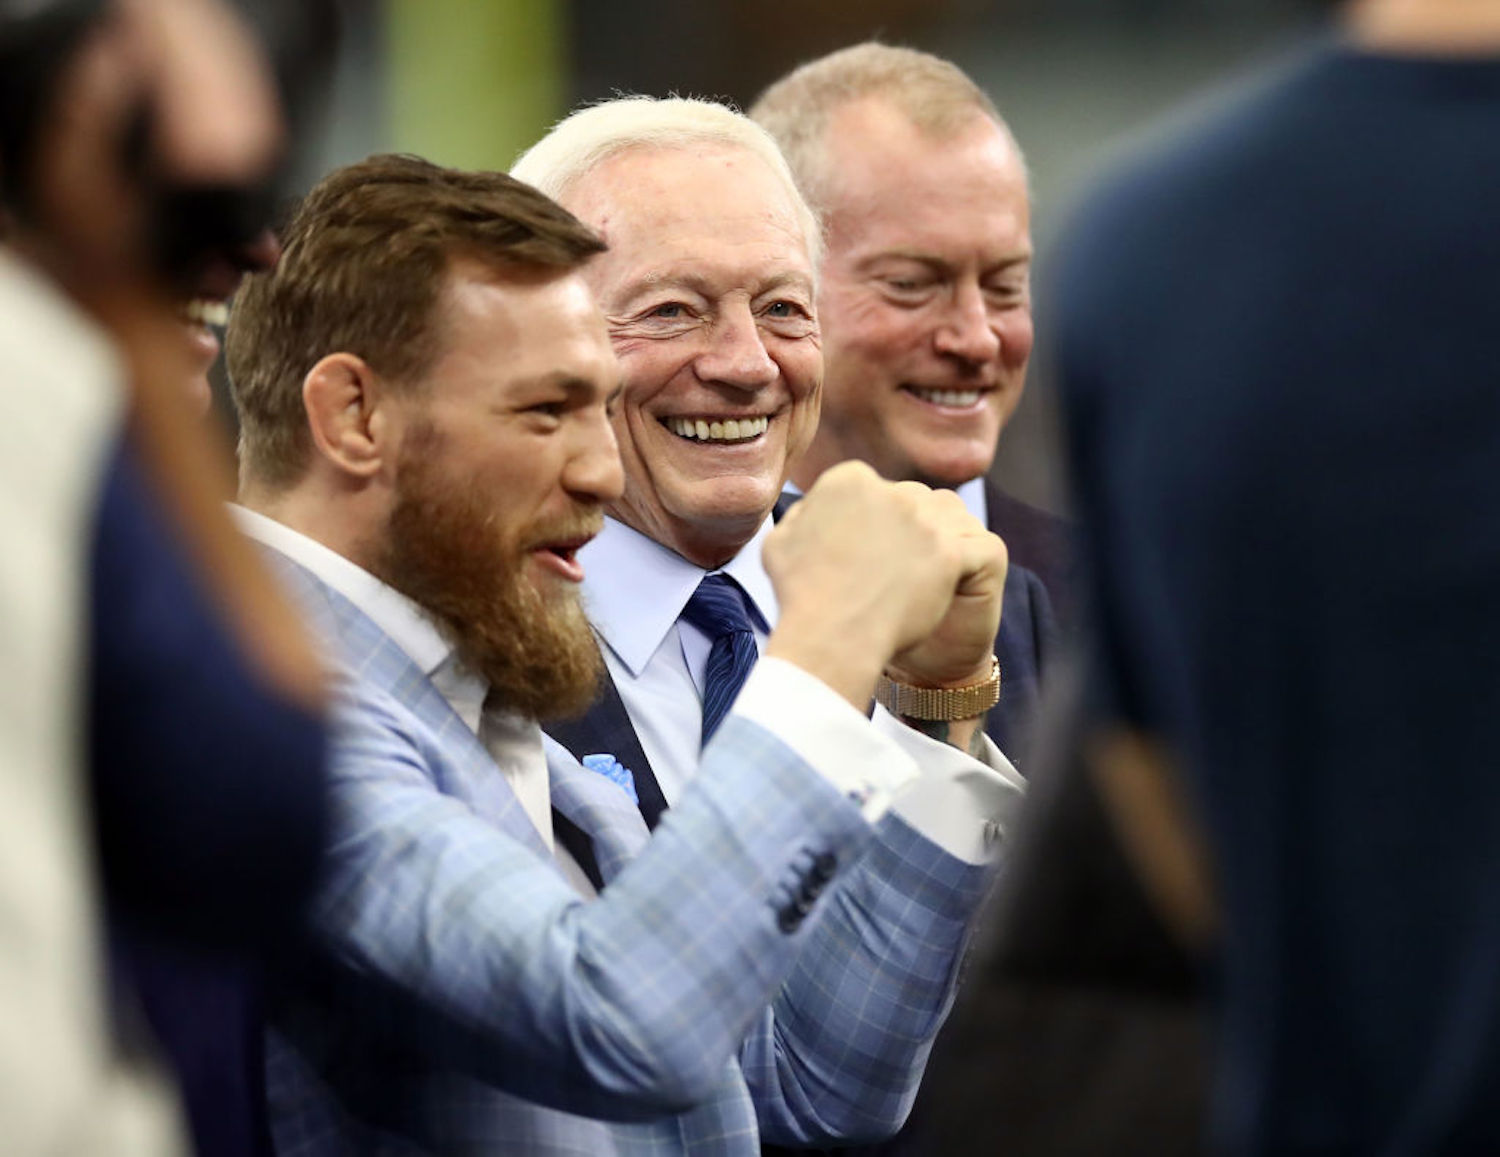 Jerry Jones is a big fan of Conor McGregor, and the Cowboys' owner and GM wants to host the UFC star's next fight in Dallas.